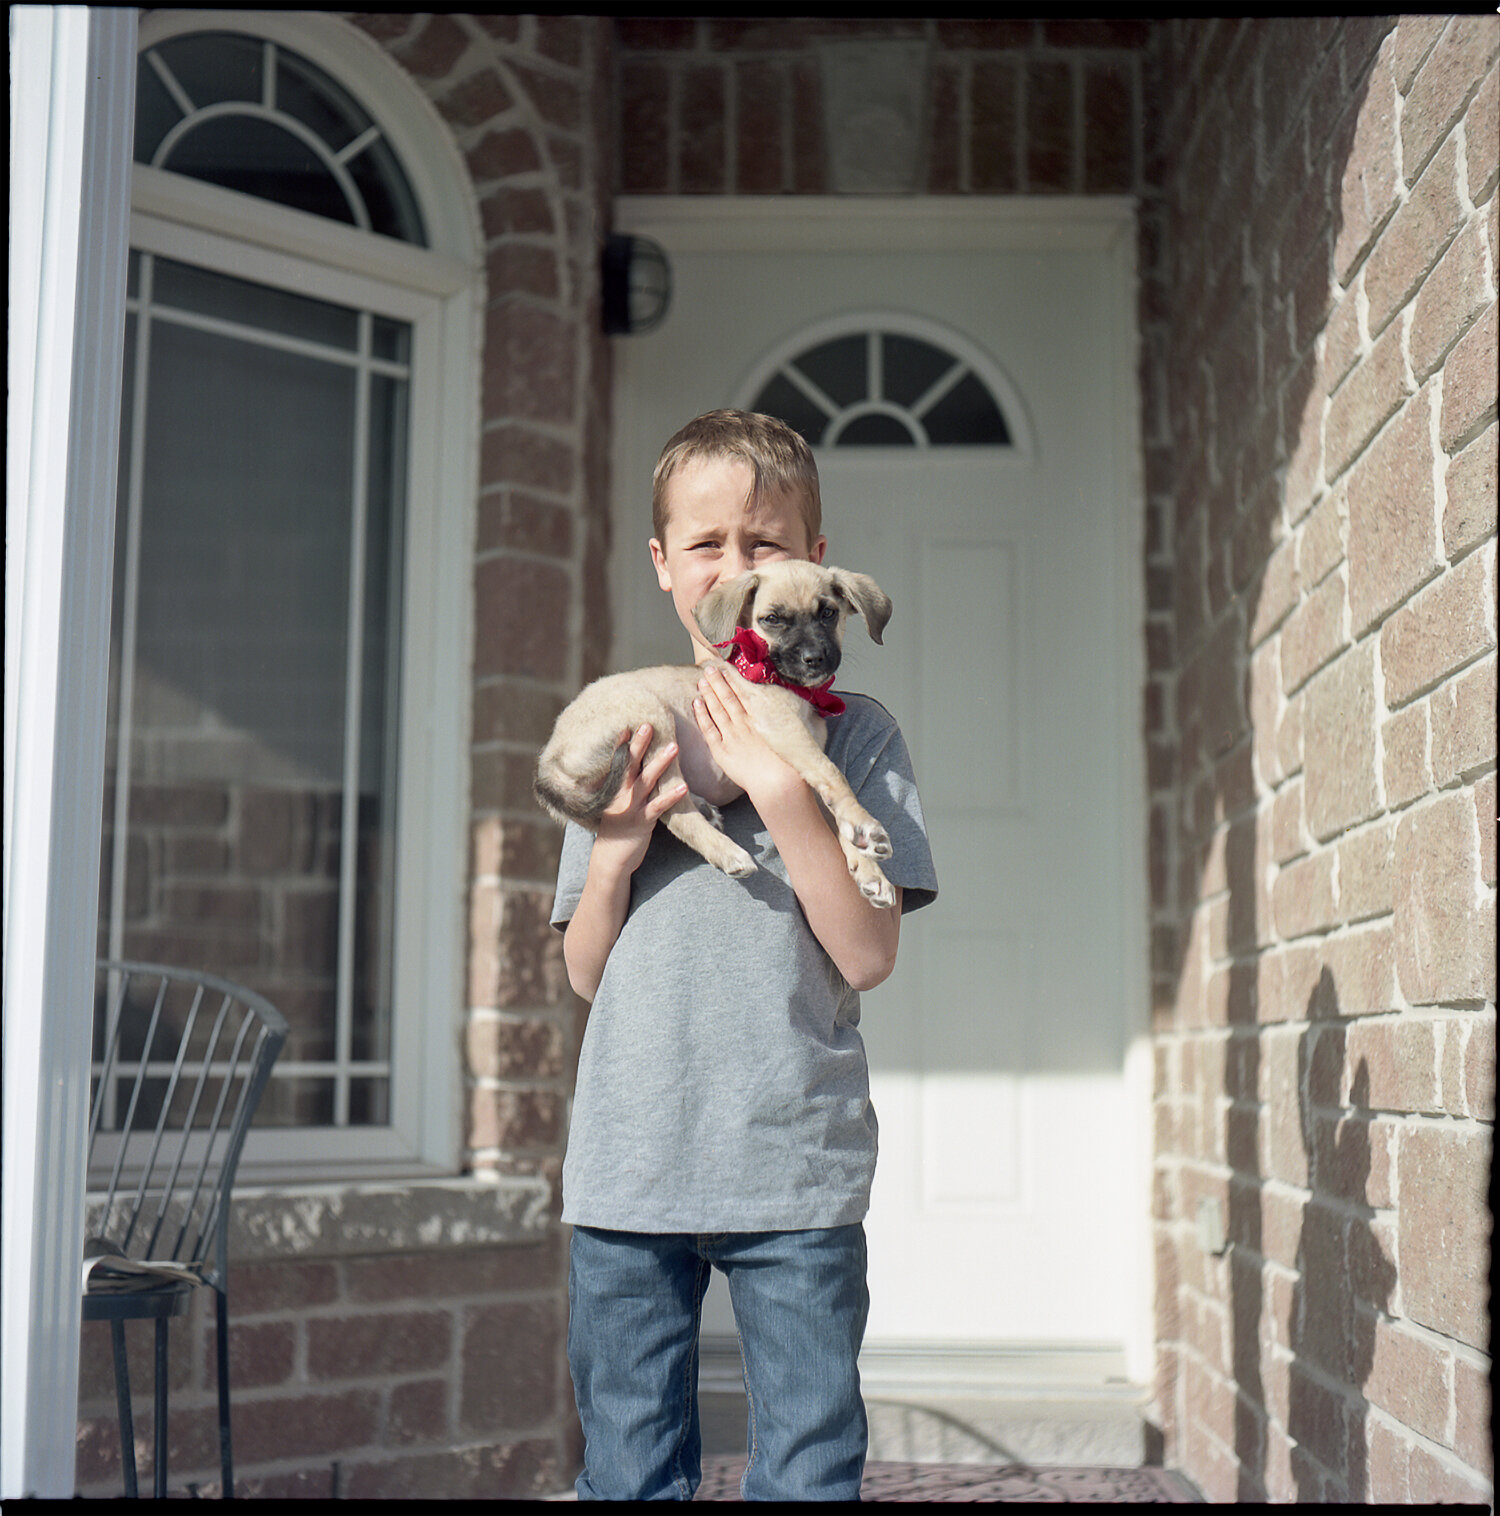 41-Spring-2015-Kodak-Portra-160-Pulled--1_Timeless-portrait-of-William-and-Puppy-Chandler.JPG